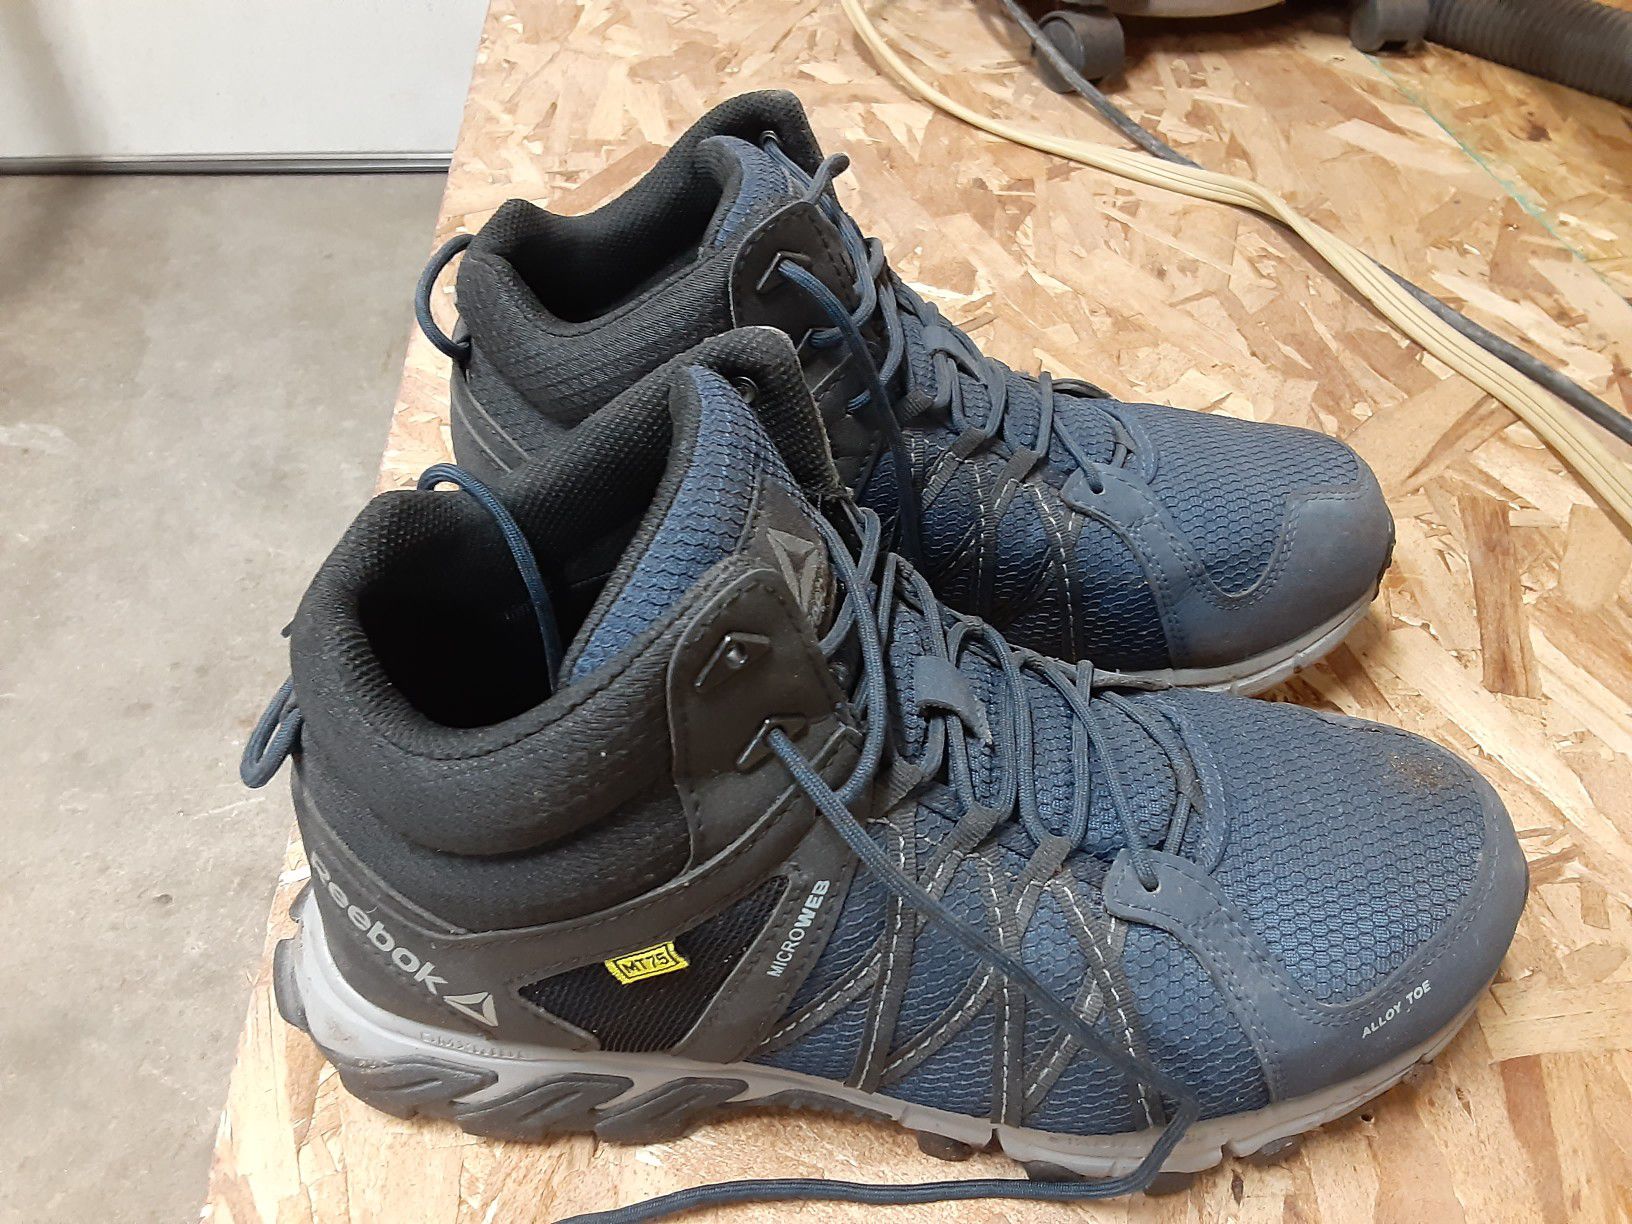 Reebok alloy toe work or hiking boots